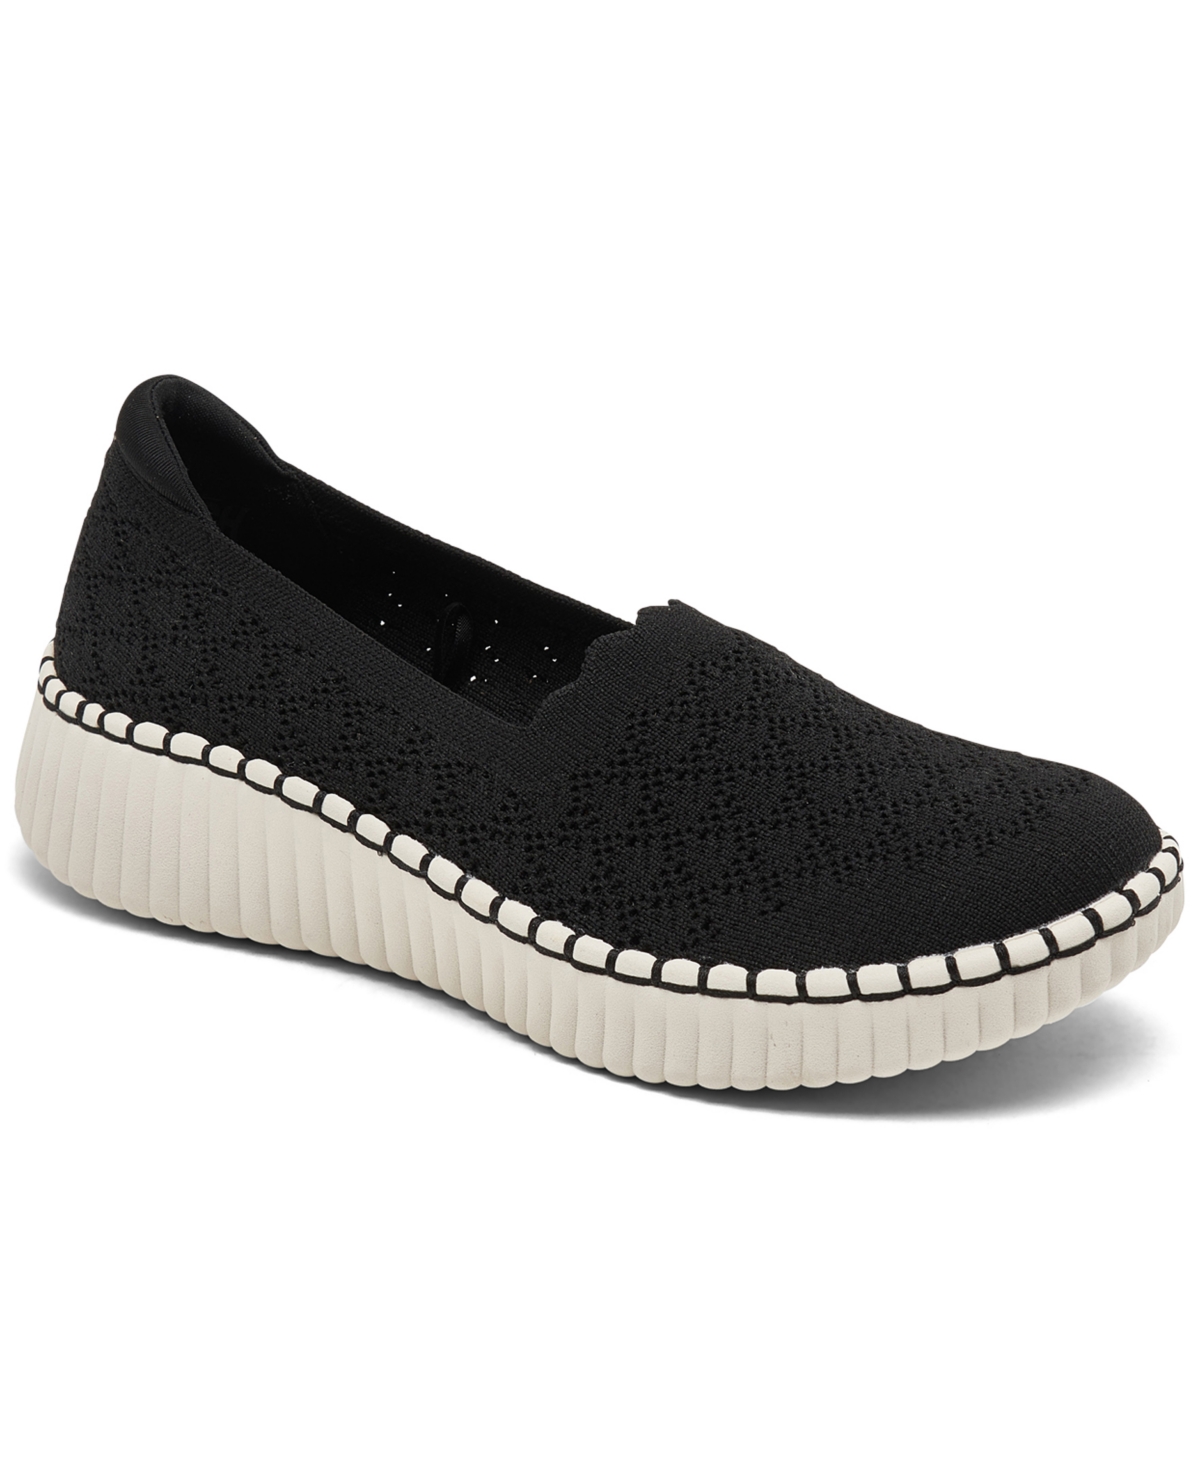 Women's Wilshire Blvd Slip-On Casual Sneakers from Finish Line - Black